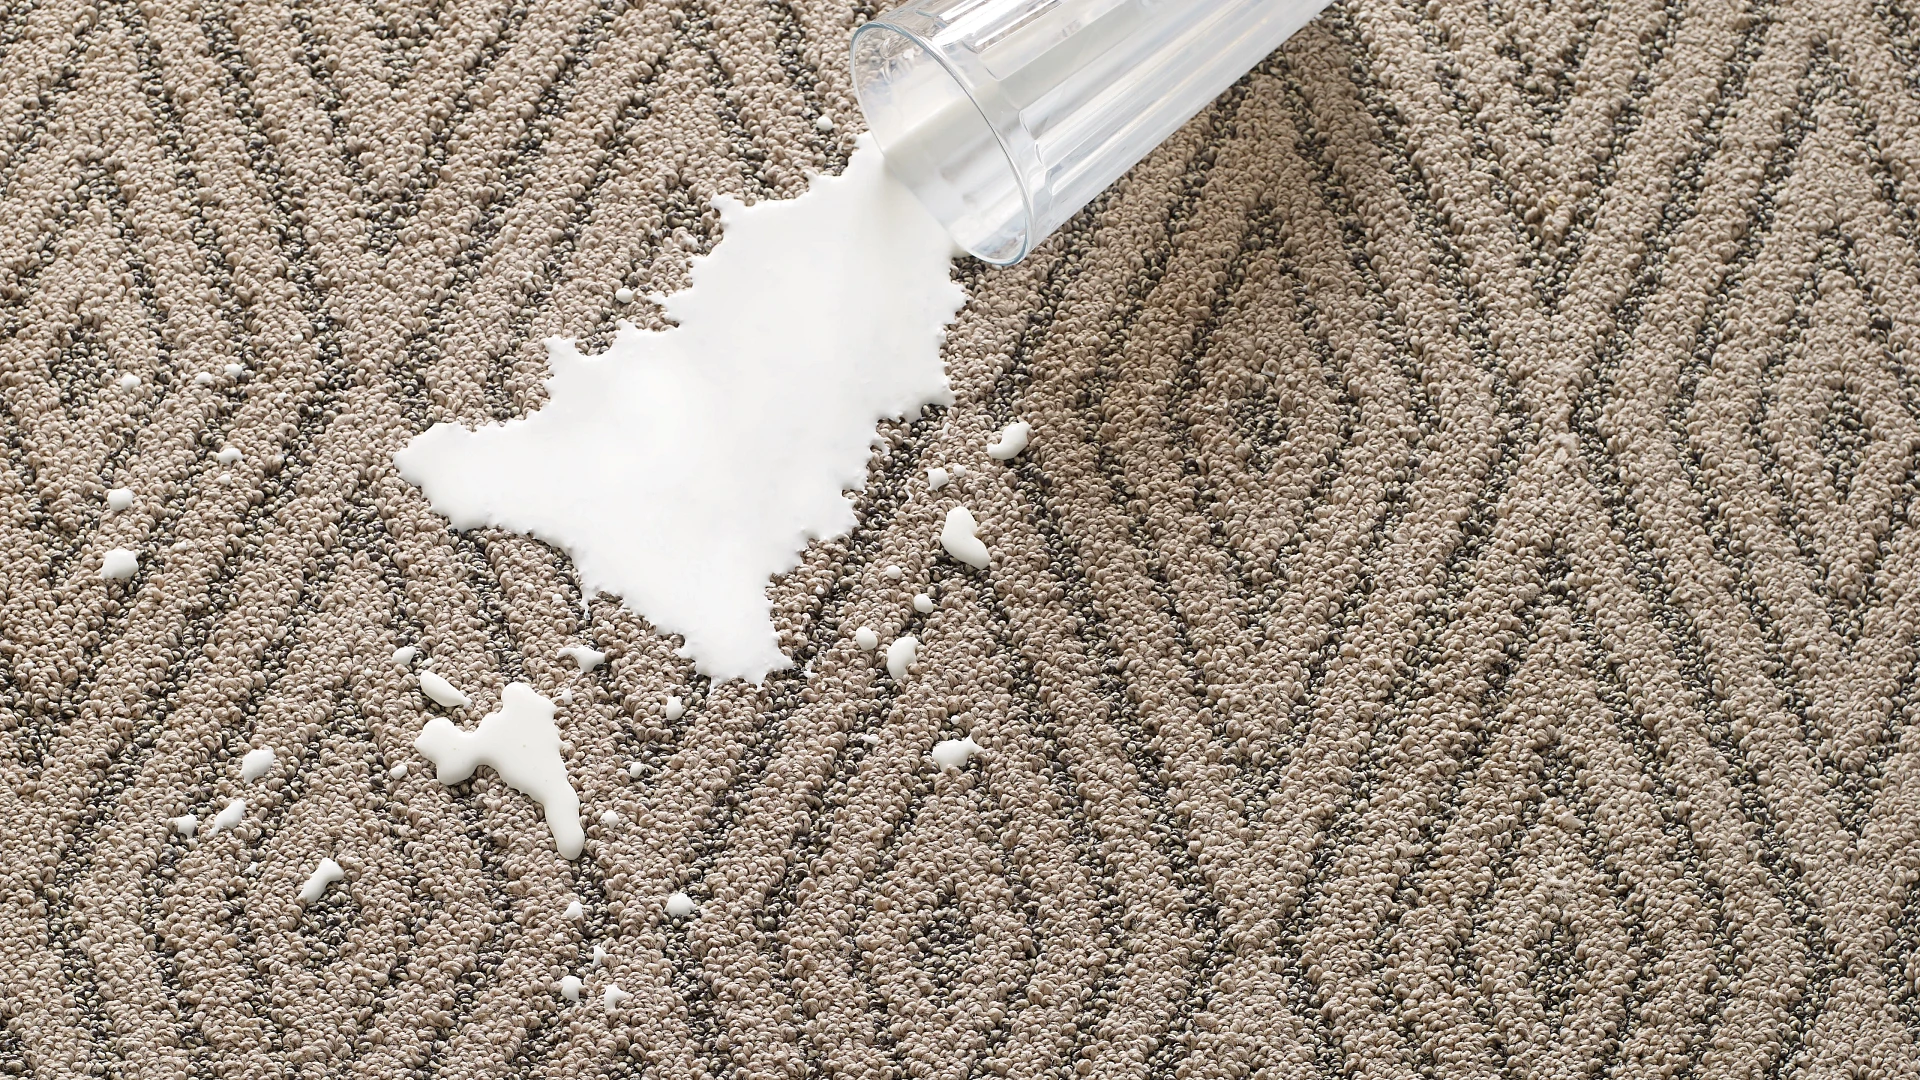 Milk spilled on patterned carpet - Free carpet cleaning services from Triangle Flooring Center in Carrboro, North Carolina